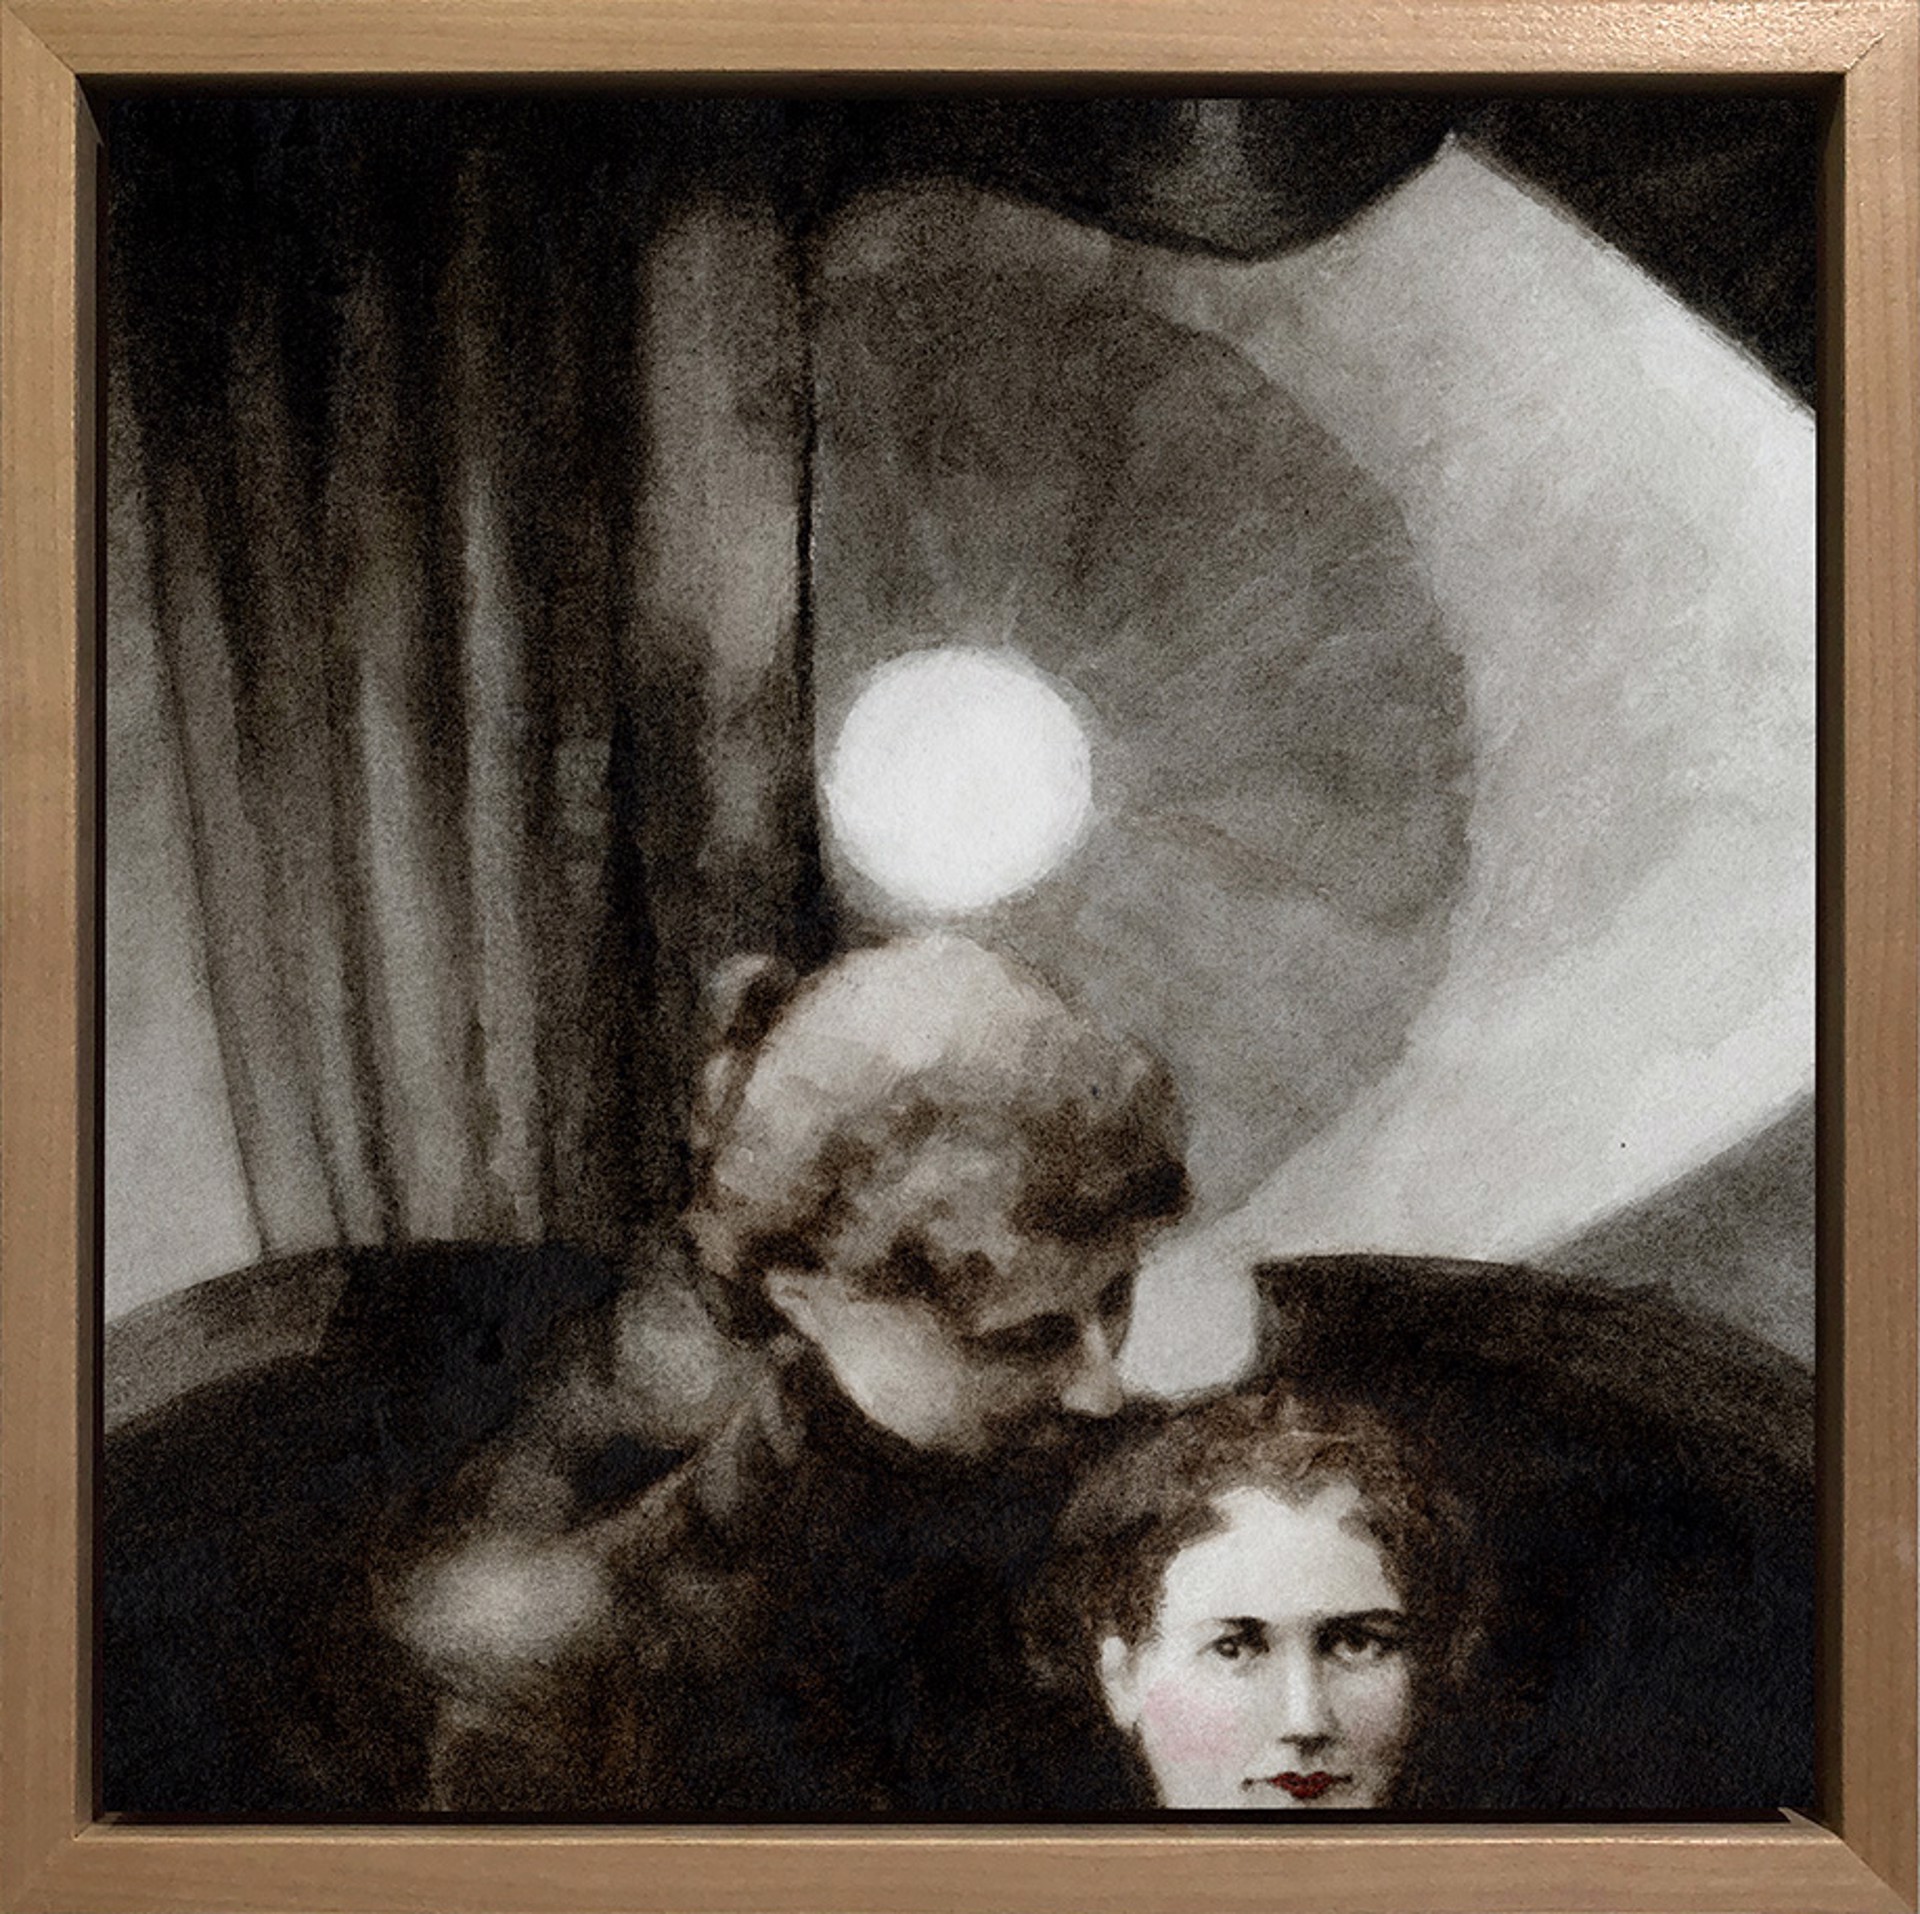 The Darkest Light, 1890 by Benz and Chang